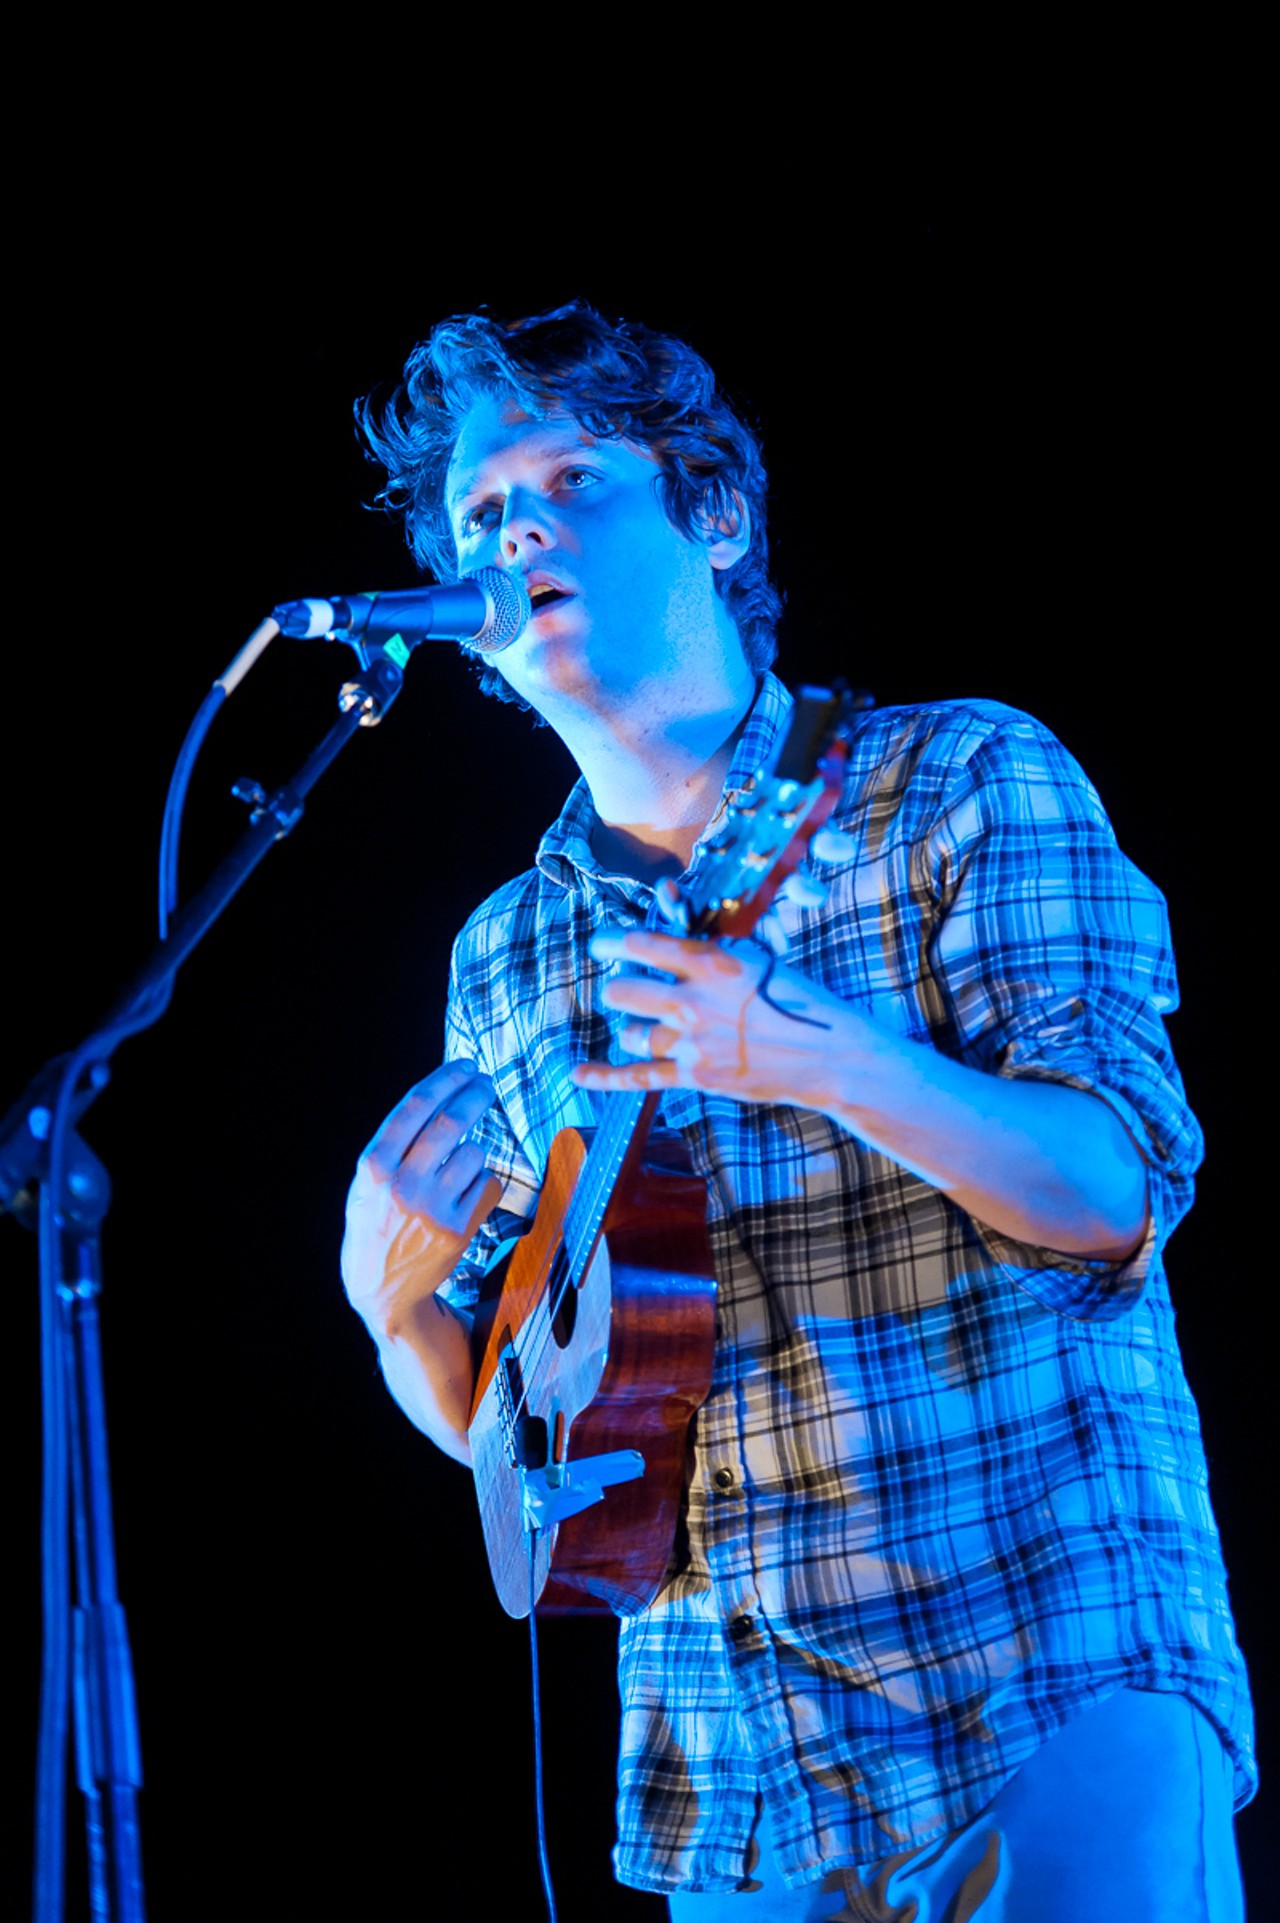 Zach Condon of Beirut, performing at The Pageant.